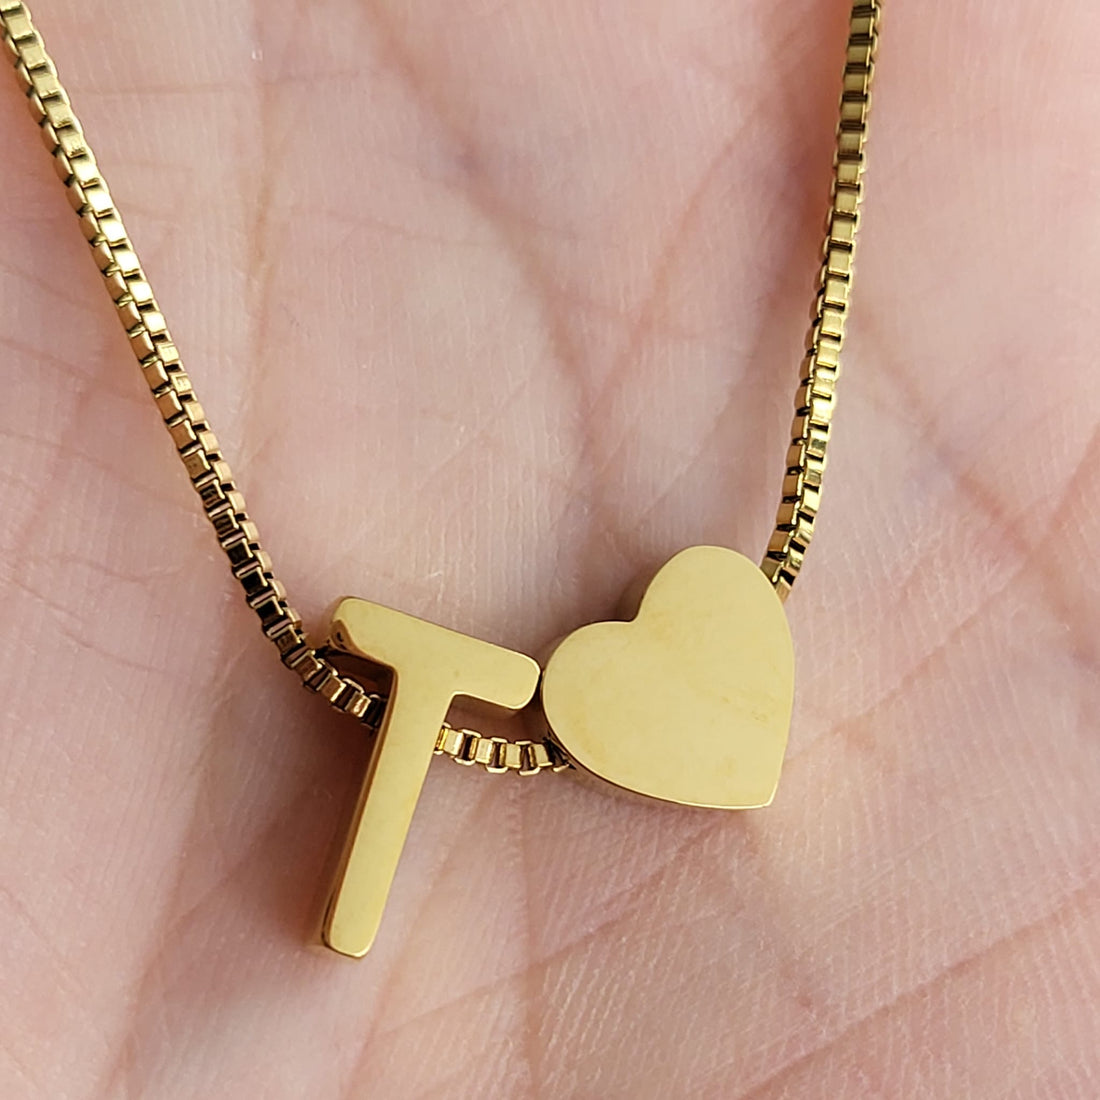 Necklace Initials Love - T